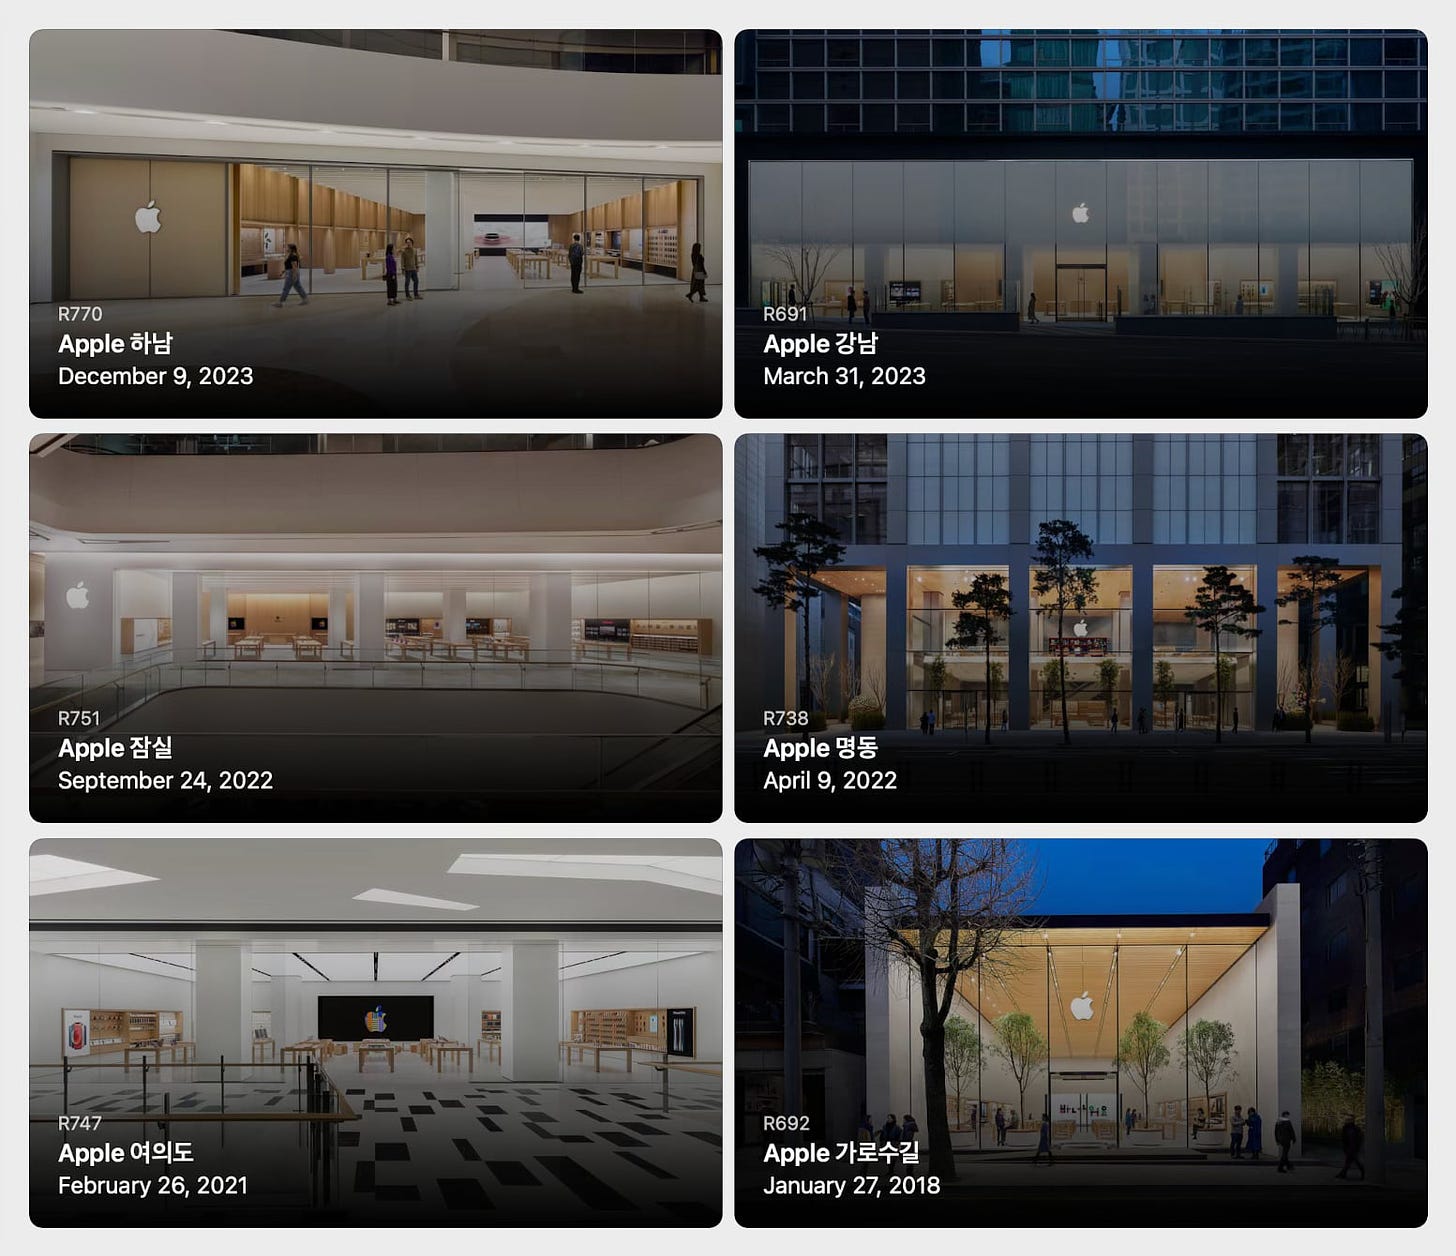 A grid of images representing every Apple Store currently open in South Korea. The image was generated using Facades 2.0.